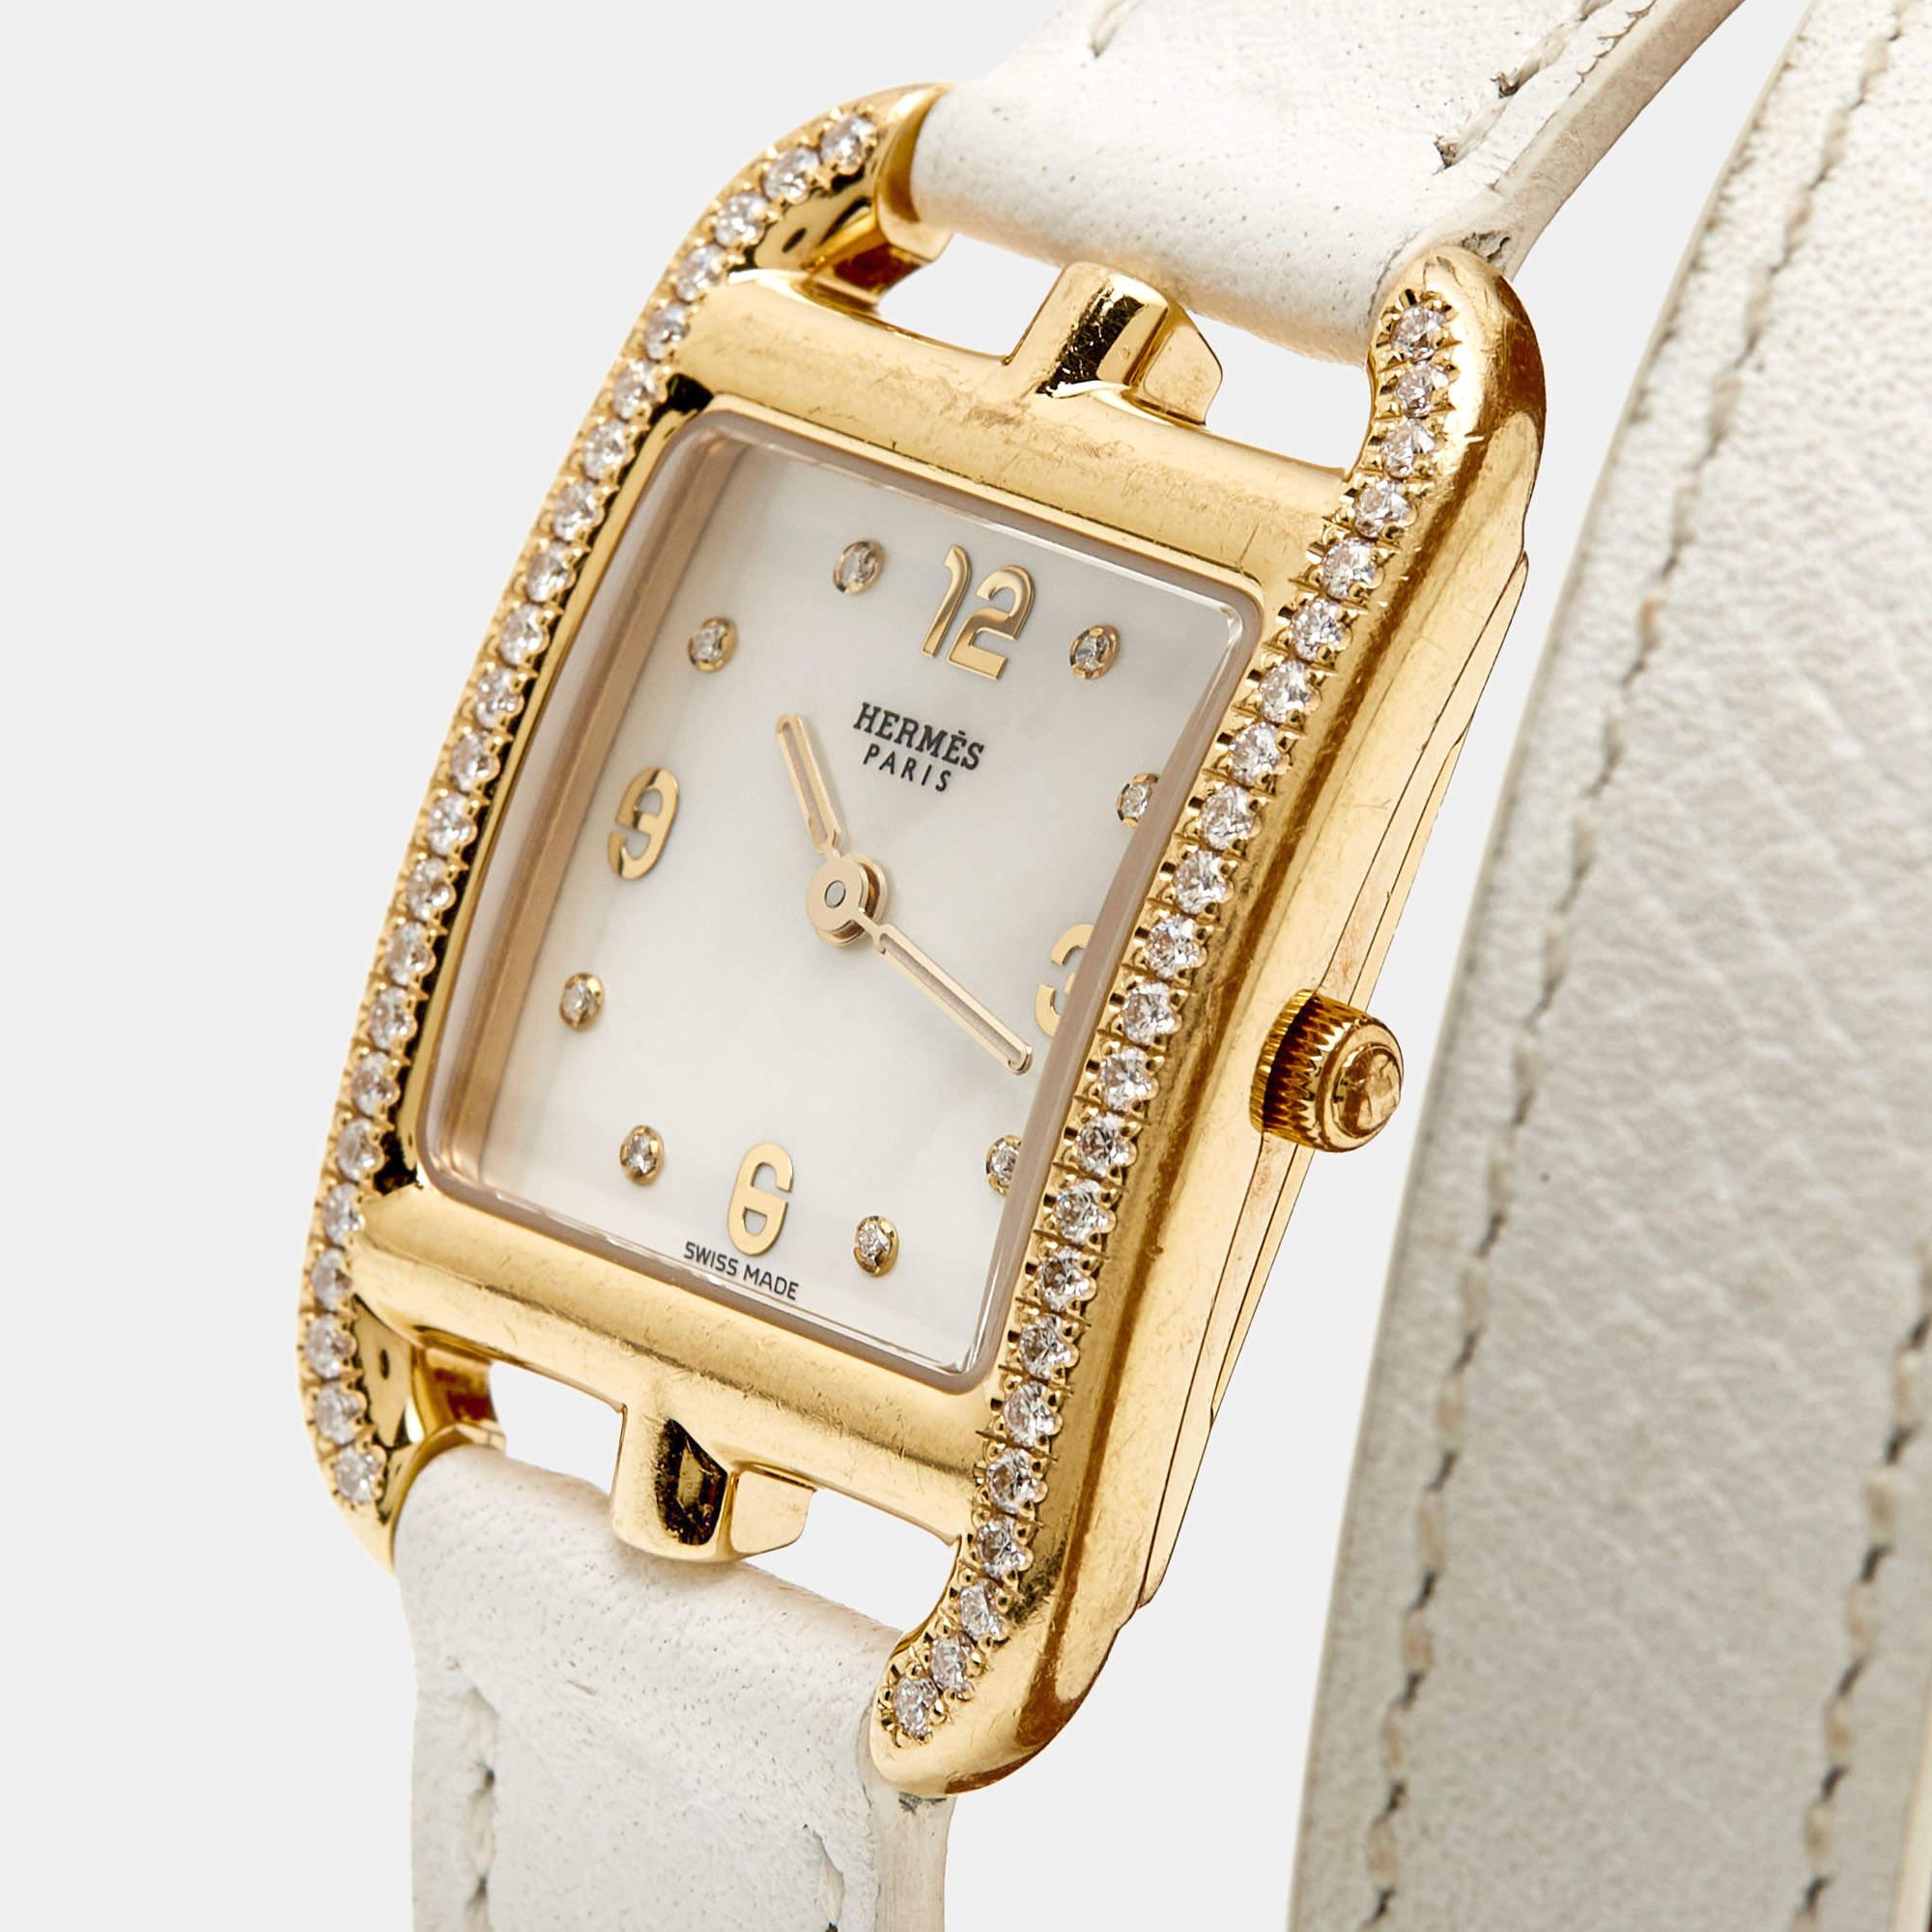 This women's wristwatch from Hermes will add a luxe touch to your everyday style. It is crafted from 18k yellow gold, and it has a mother-of-pearl dial and the perfect addition of diamonds, elevating its beauty. The watch is finished with a double